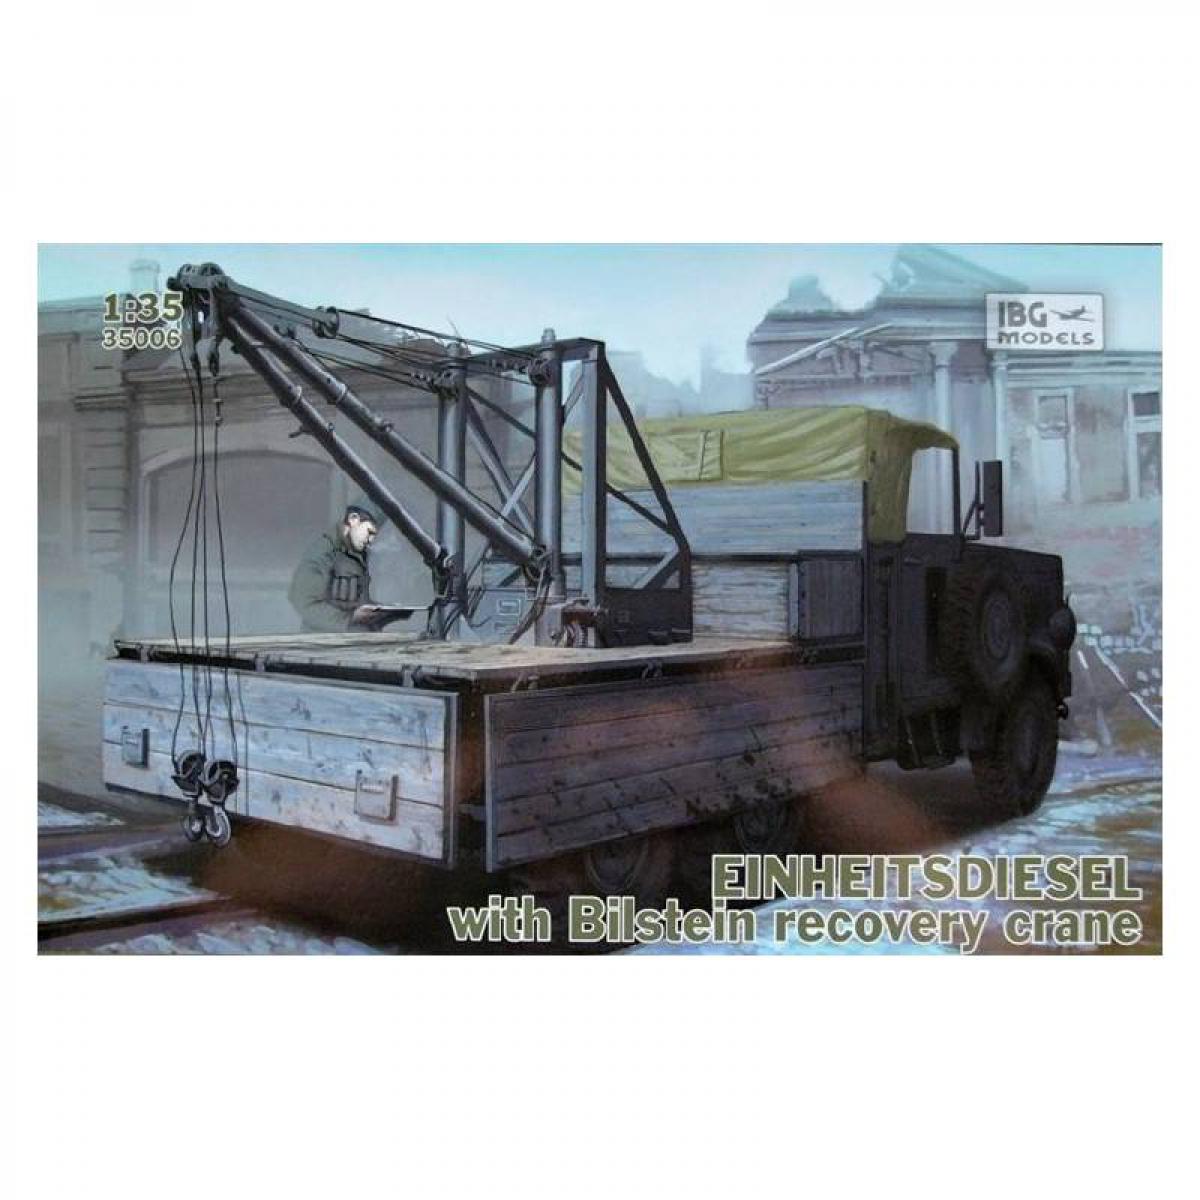 Ibg Models - Maquette Véhicule Einheitsdiesel With Bilstein Recovery Crane - Chars